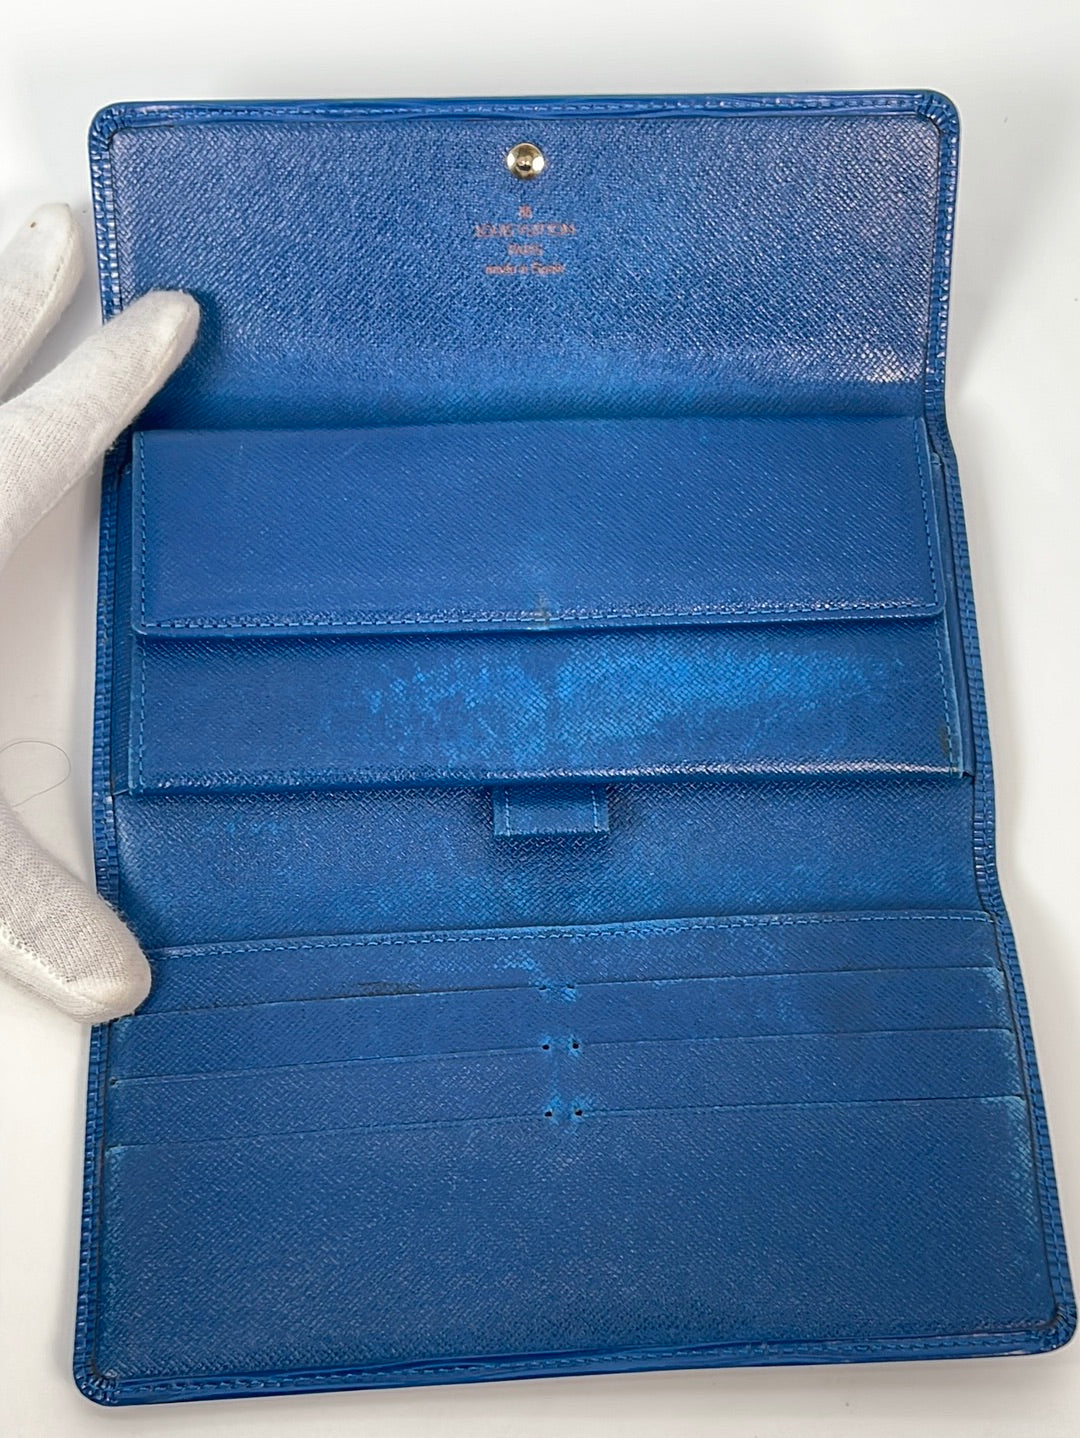 Used louis vuitton blue epi leather w/ insert wallet